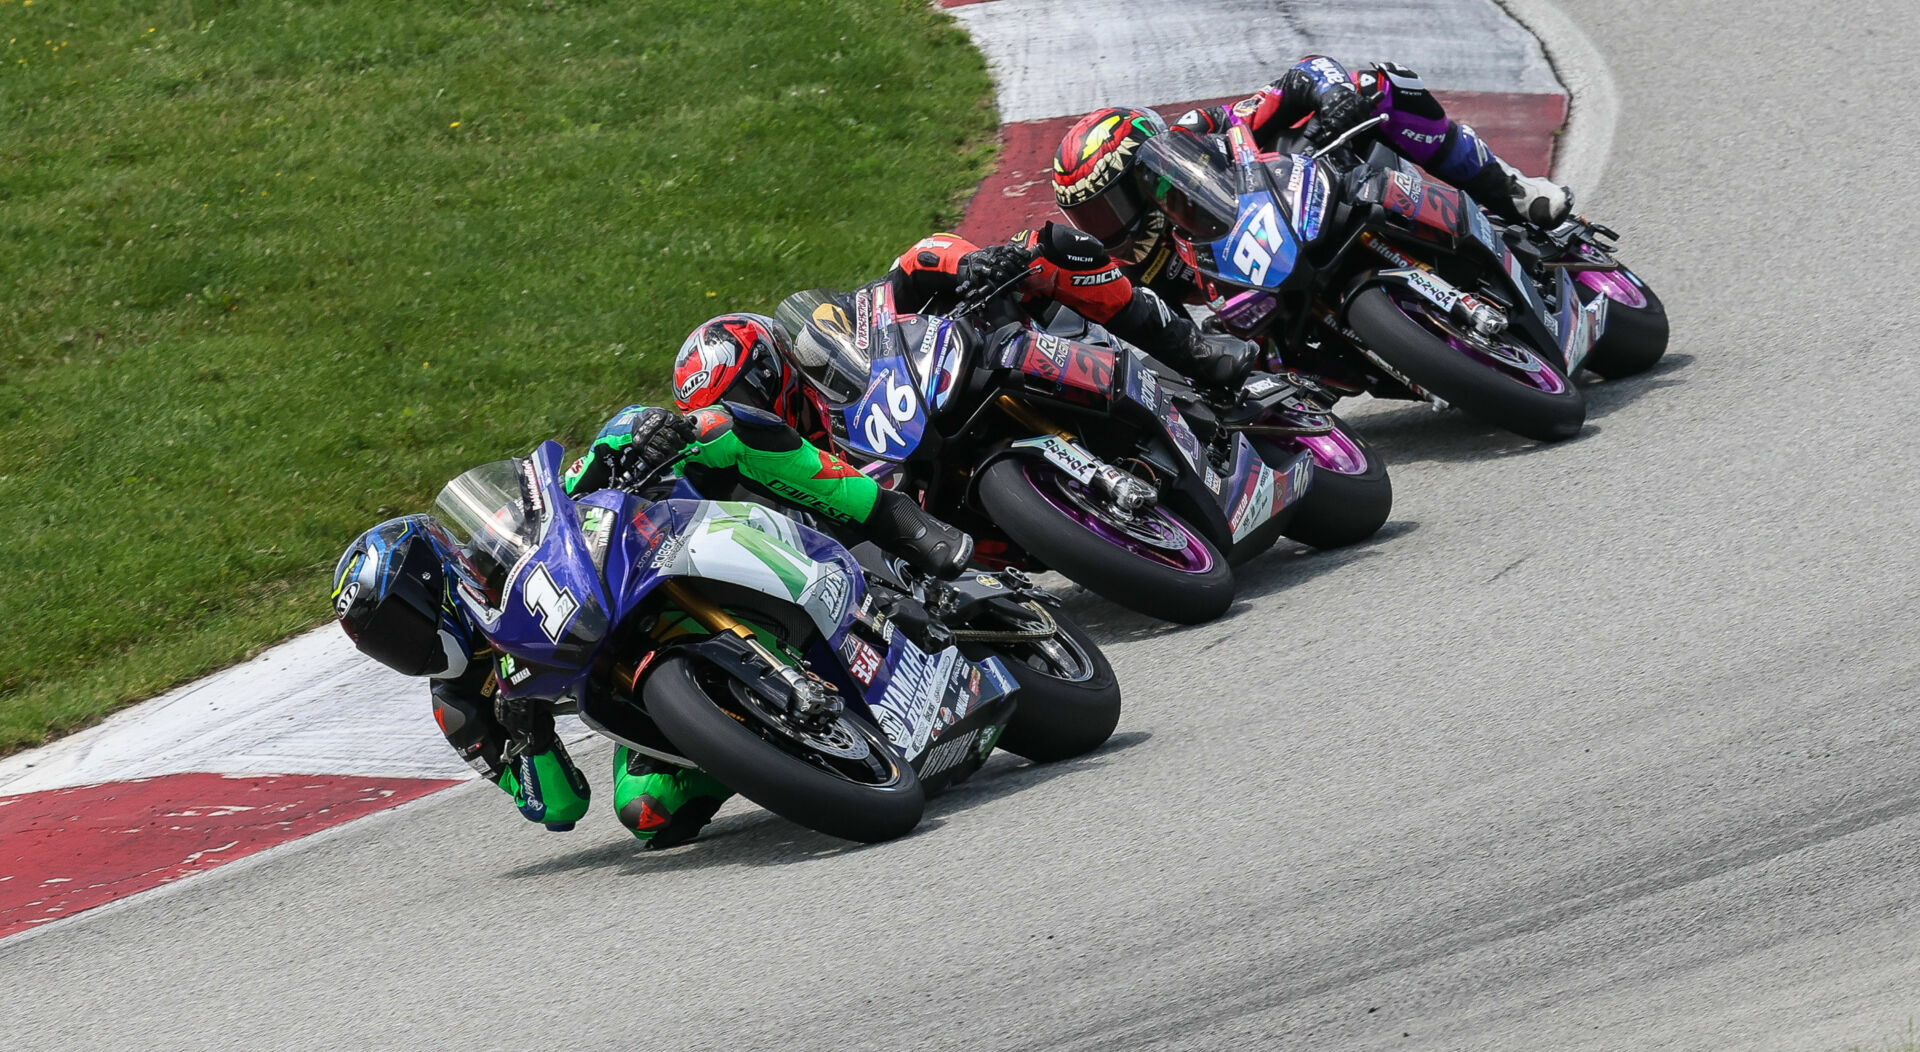 Blake Davis (1), Gus Rodio (96), and Rocco Landers (97) as seen during MotoAmerica Twins Cup Race Two at PittRace in 2023. Photo by Brian J. Nelson.